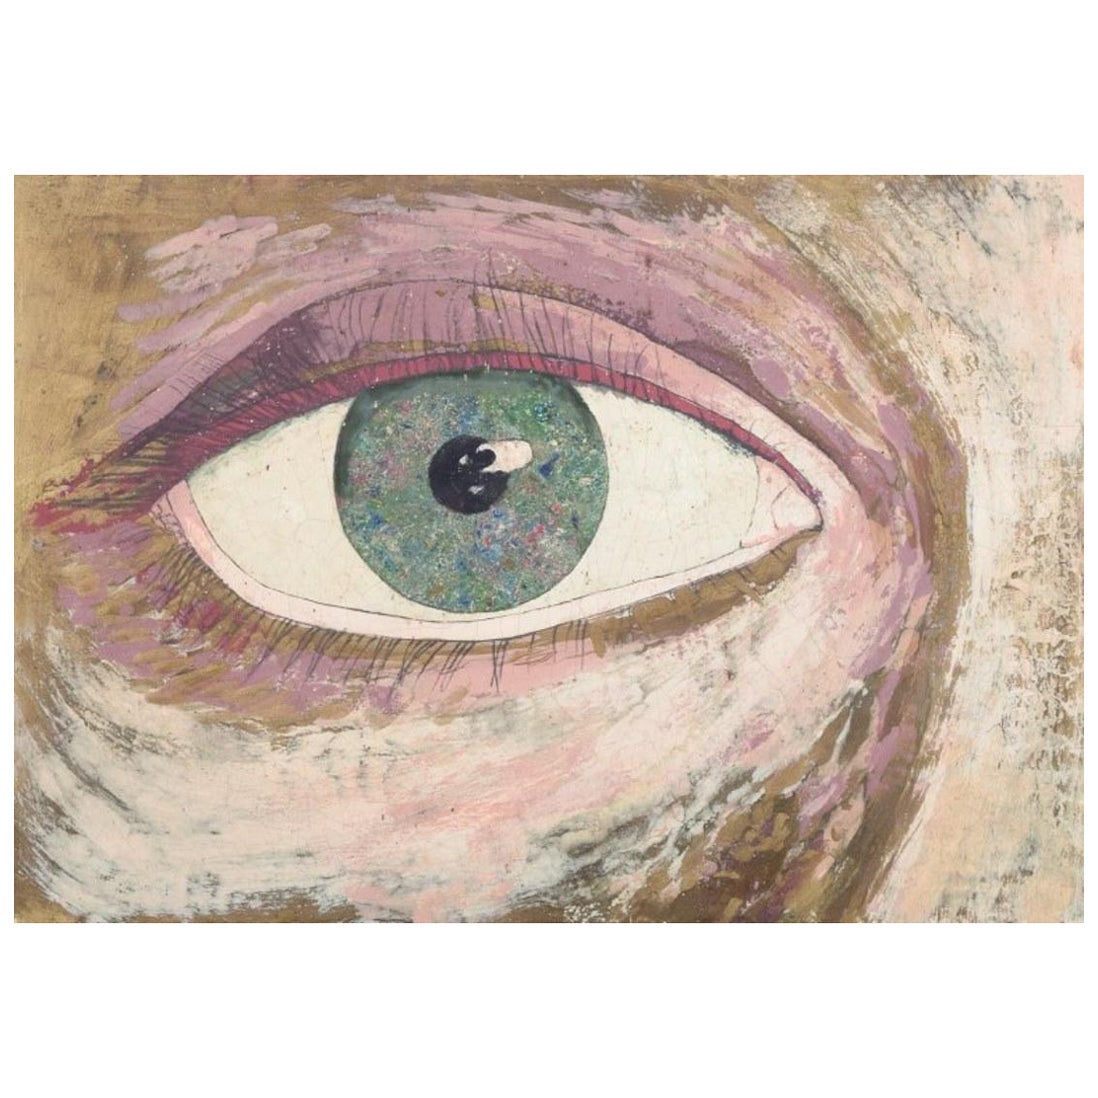 Ingvar Engdahl, Swedish artist. Mixed media on board. Close-up view of an eye.